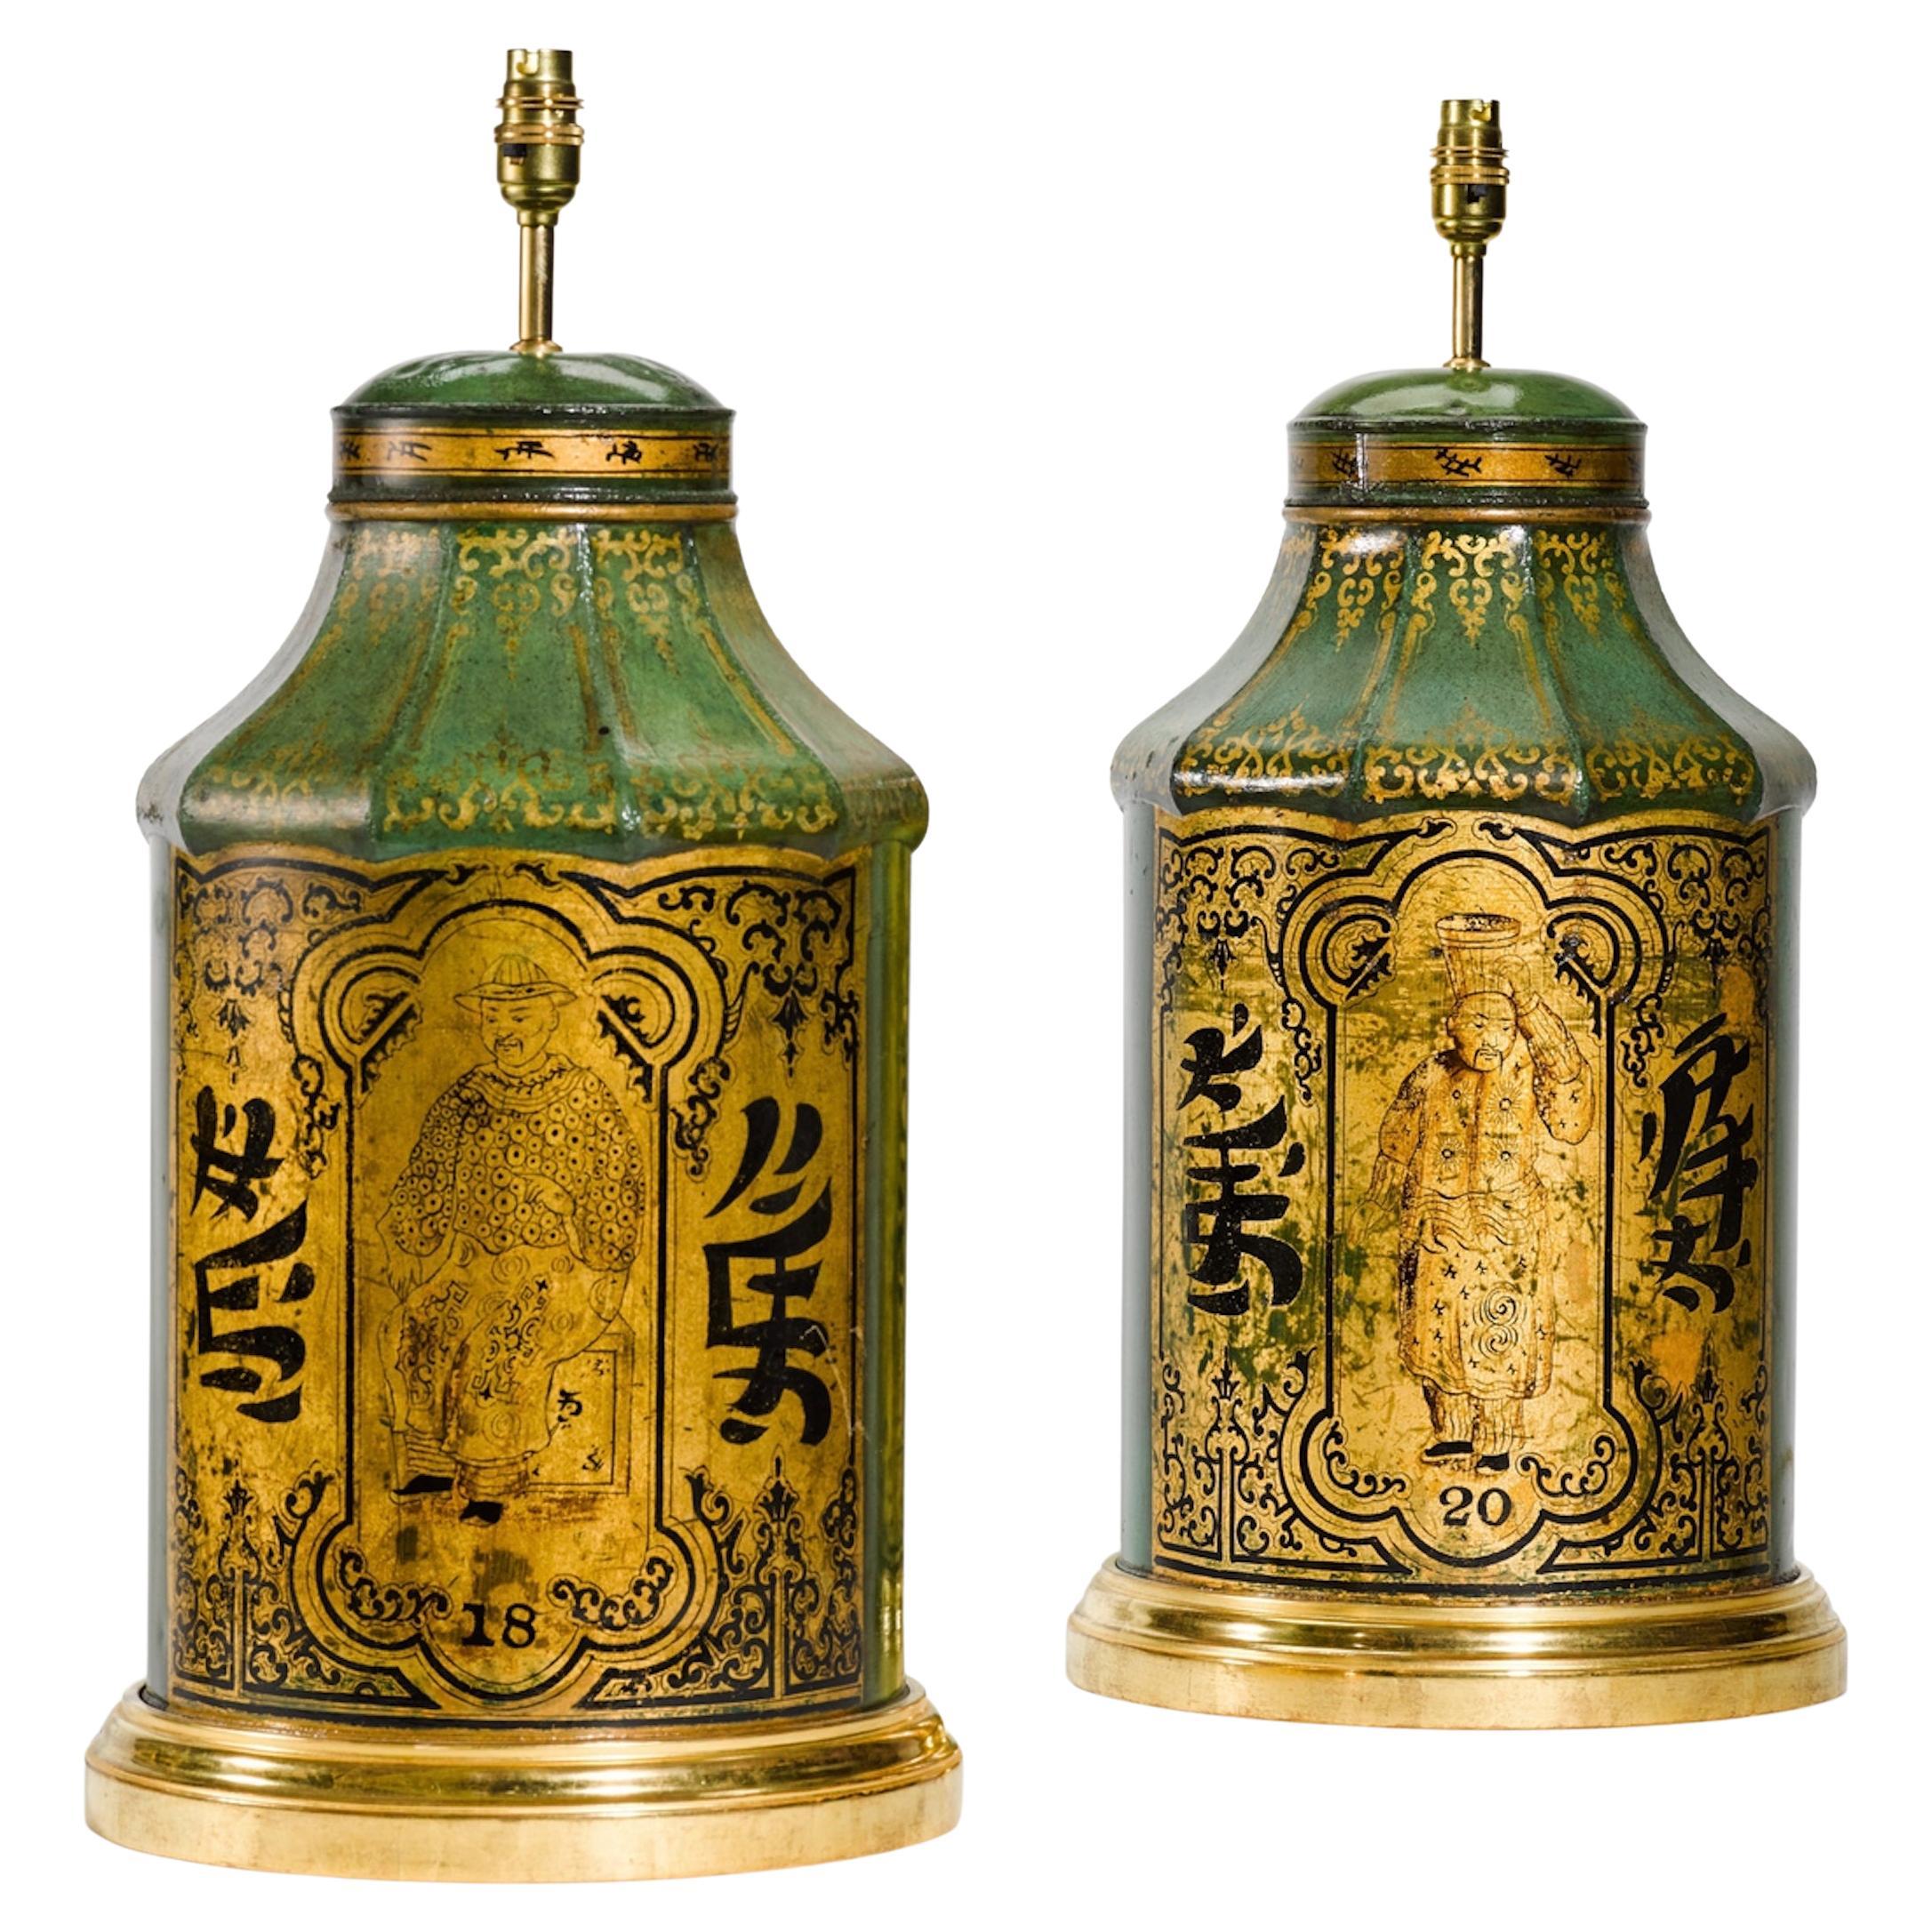 Pair of Gold and Green 19th Century Tea Canister Antique Table Lamps